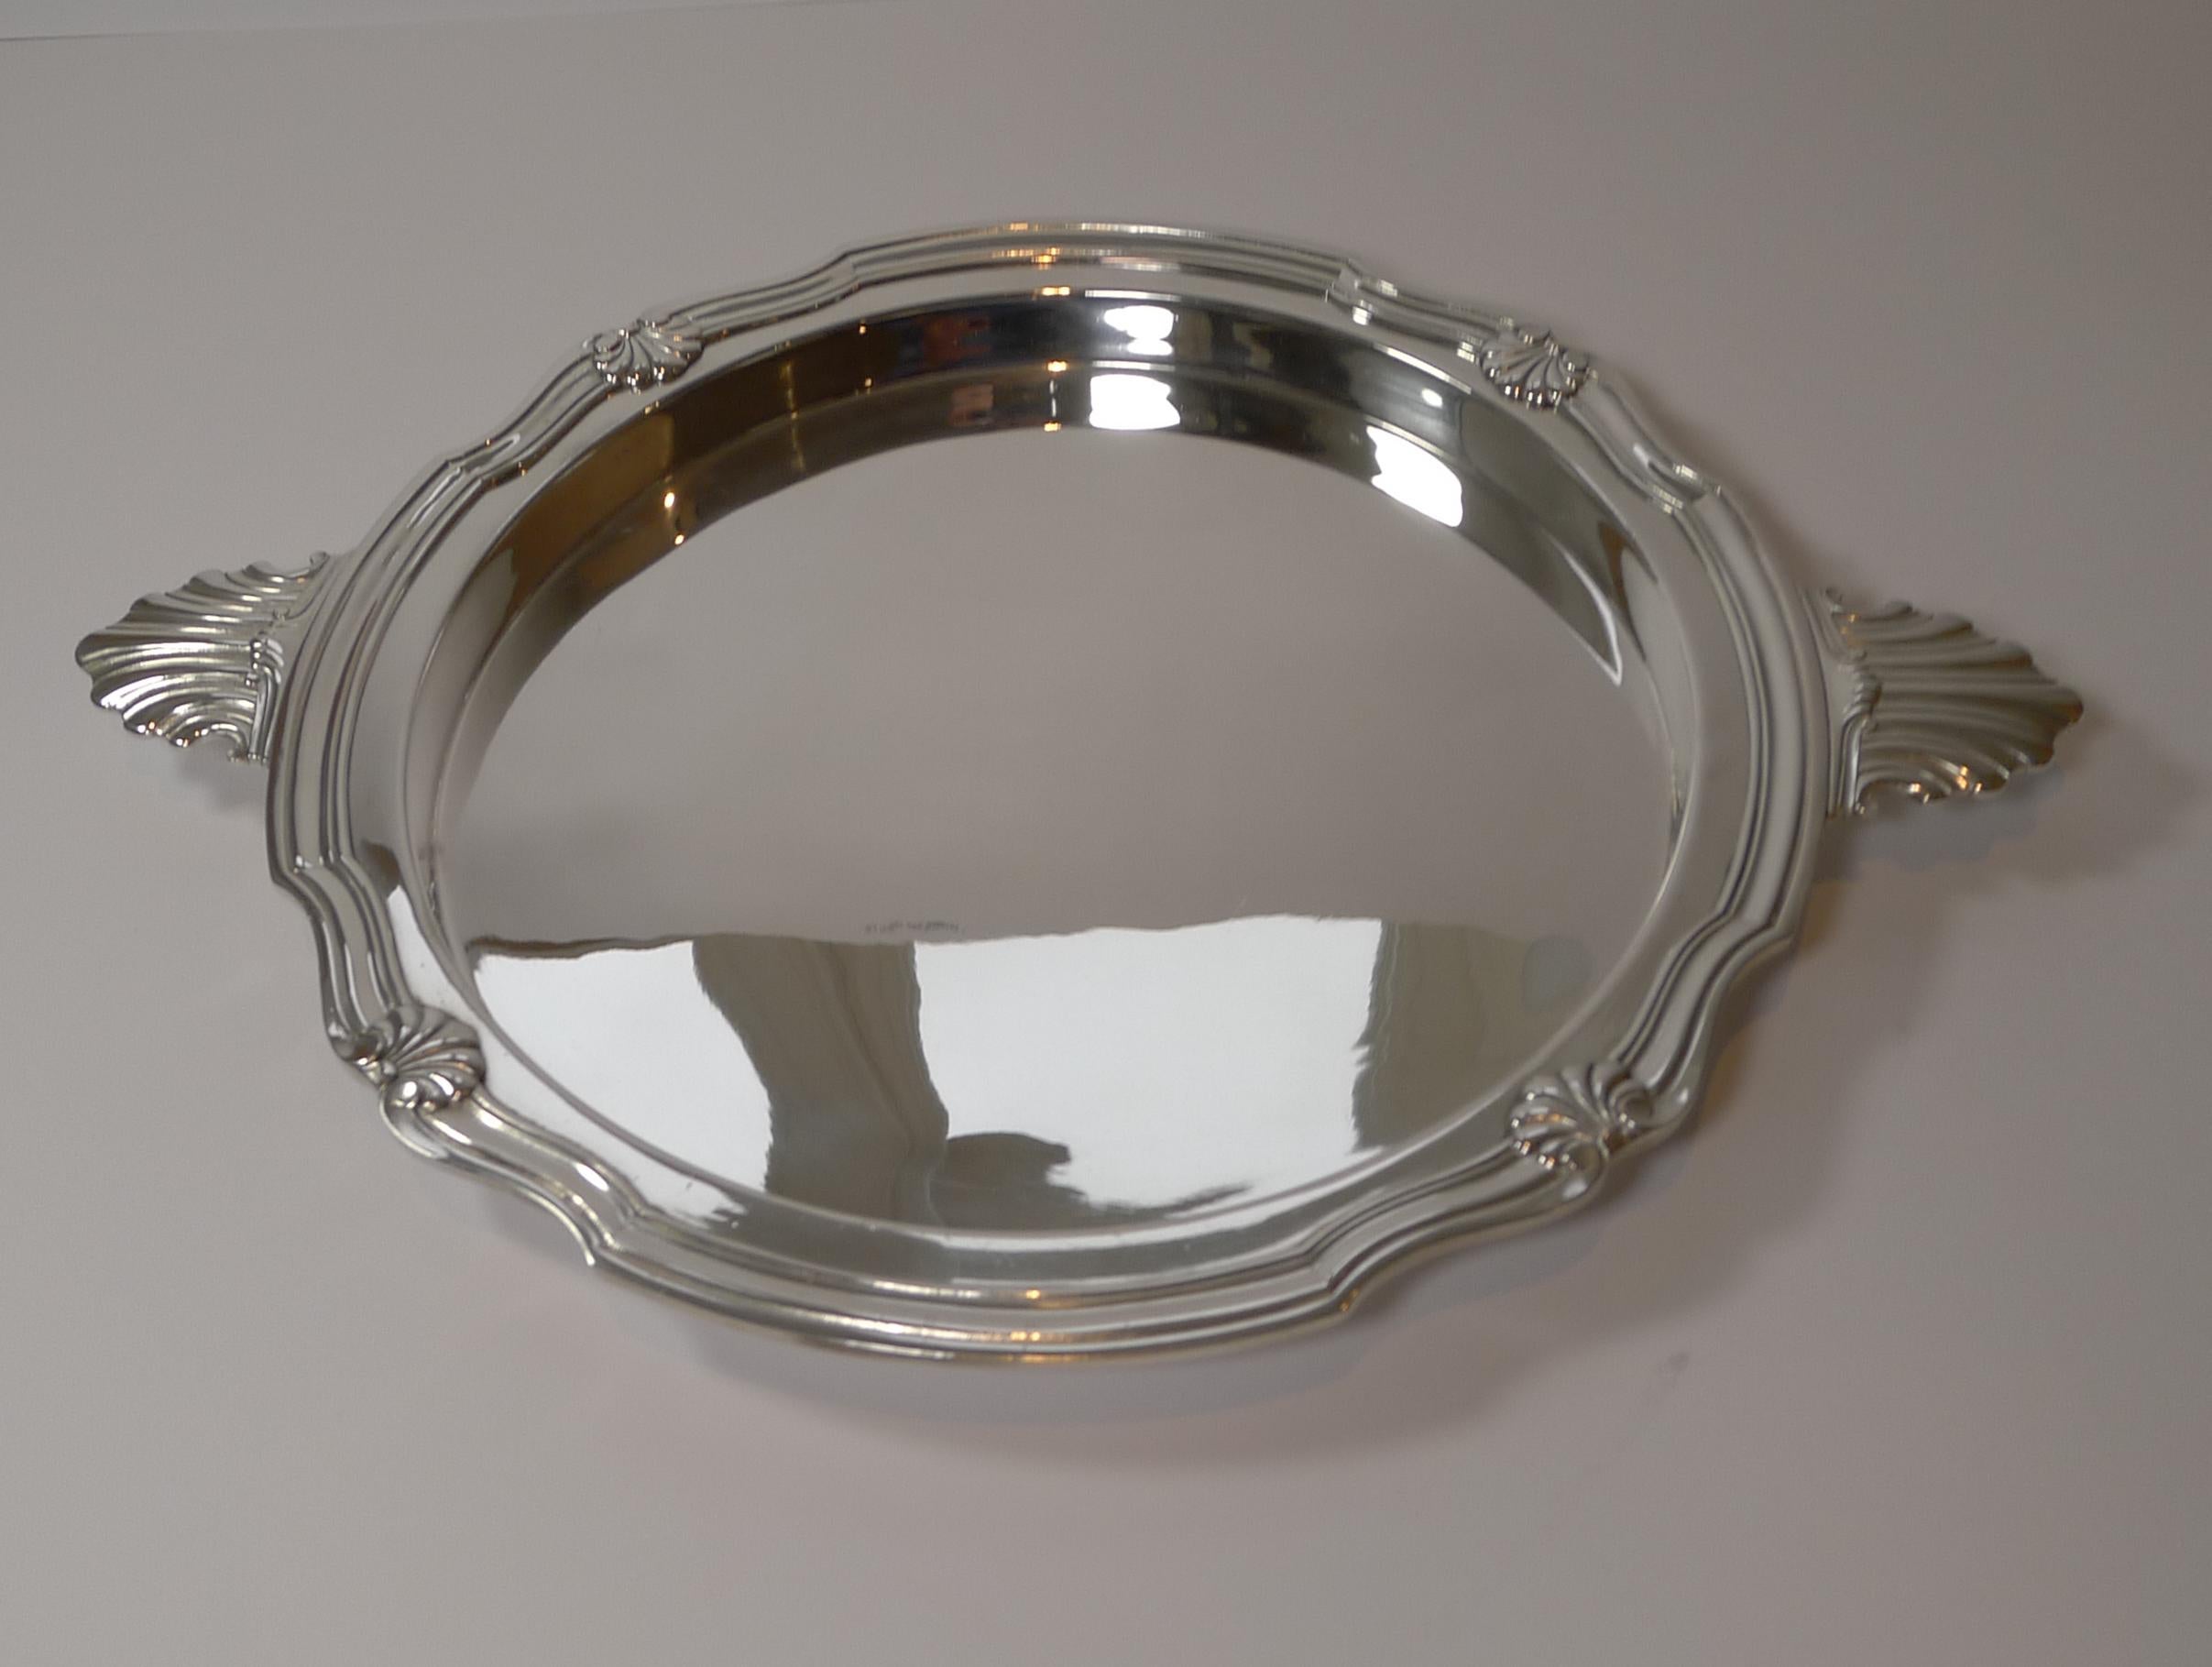 French Silver Plated Cocktail or Serving Tray by Victor Saglier, Paris In Good Condition For Sale In Bath, GB